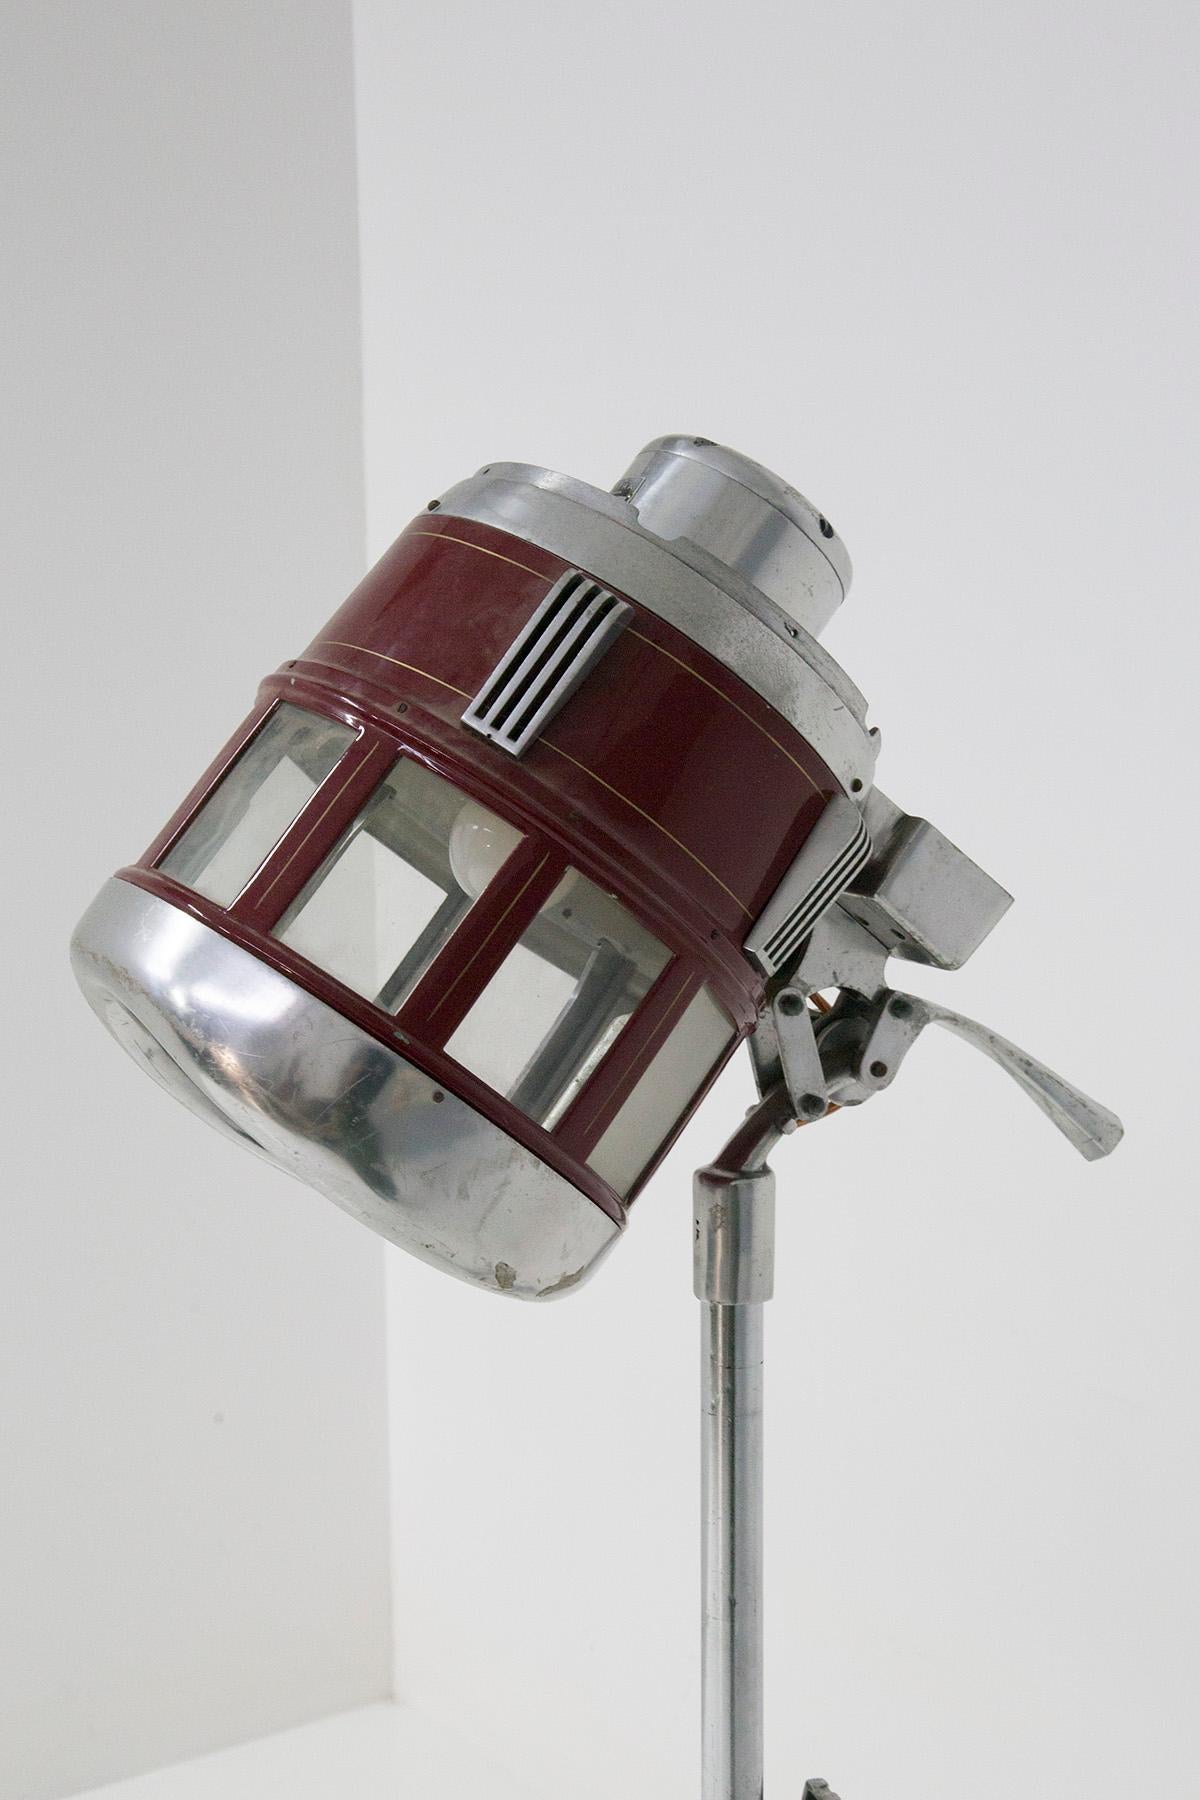 Beautiful decorative impact lamp made from a 1950s hairdresser's helmet, from the Free S series.
The helmet is made of a very solid and durable metal alloy, with a three-foot leg that allows the weight to be well distributed.
The rod that connects